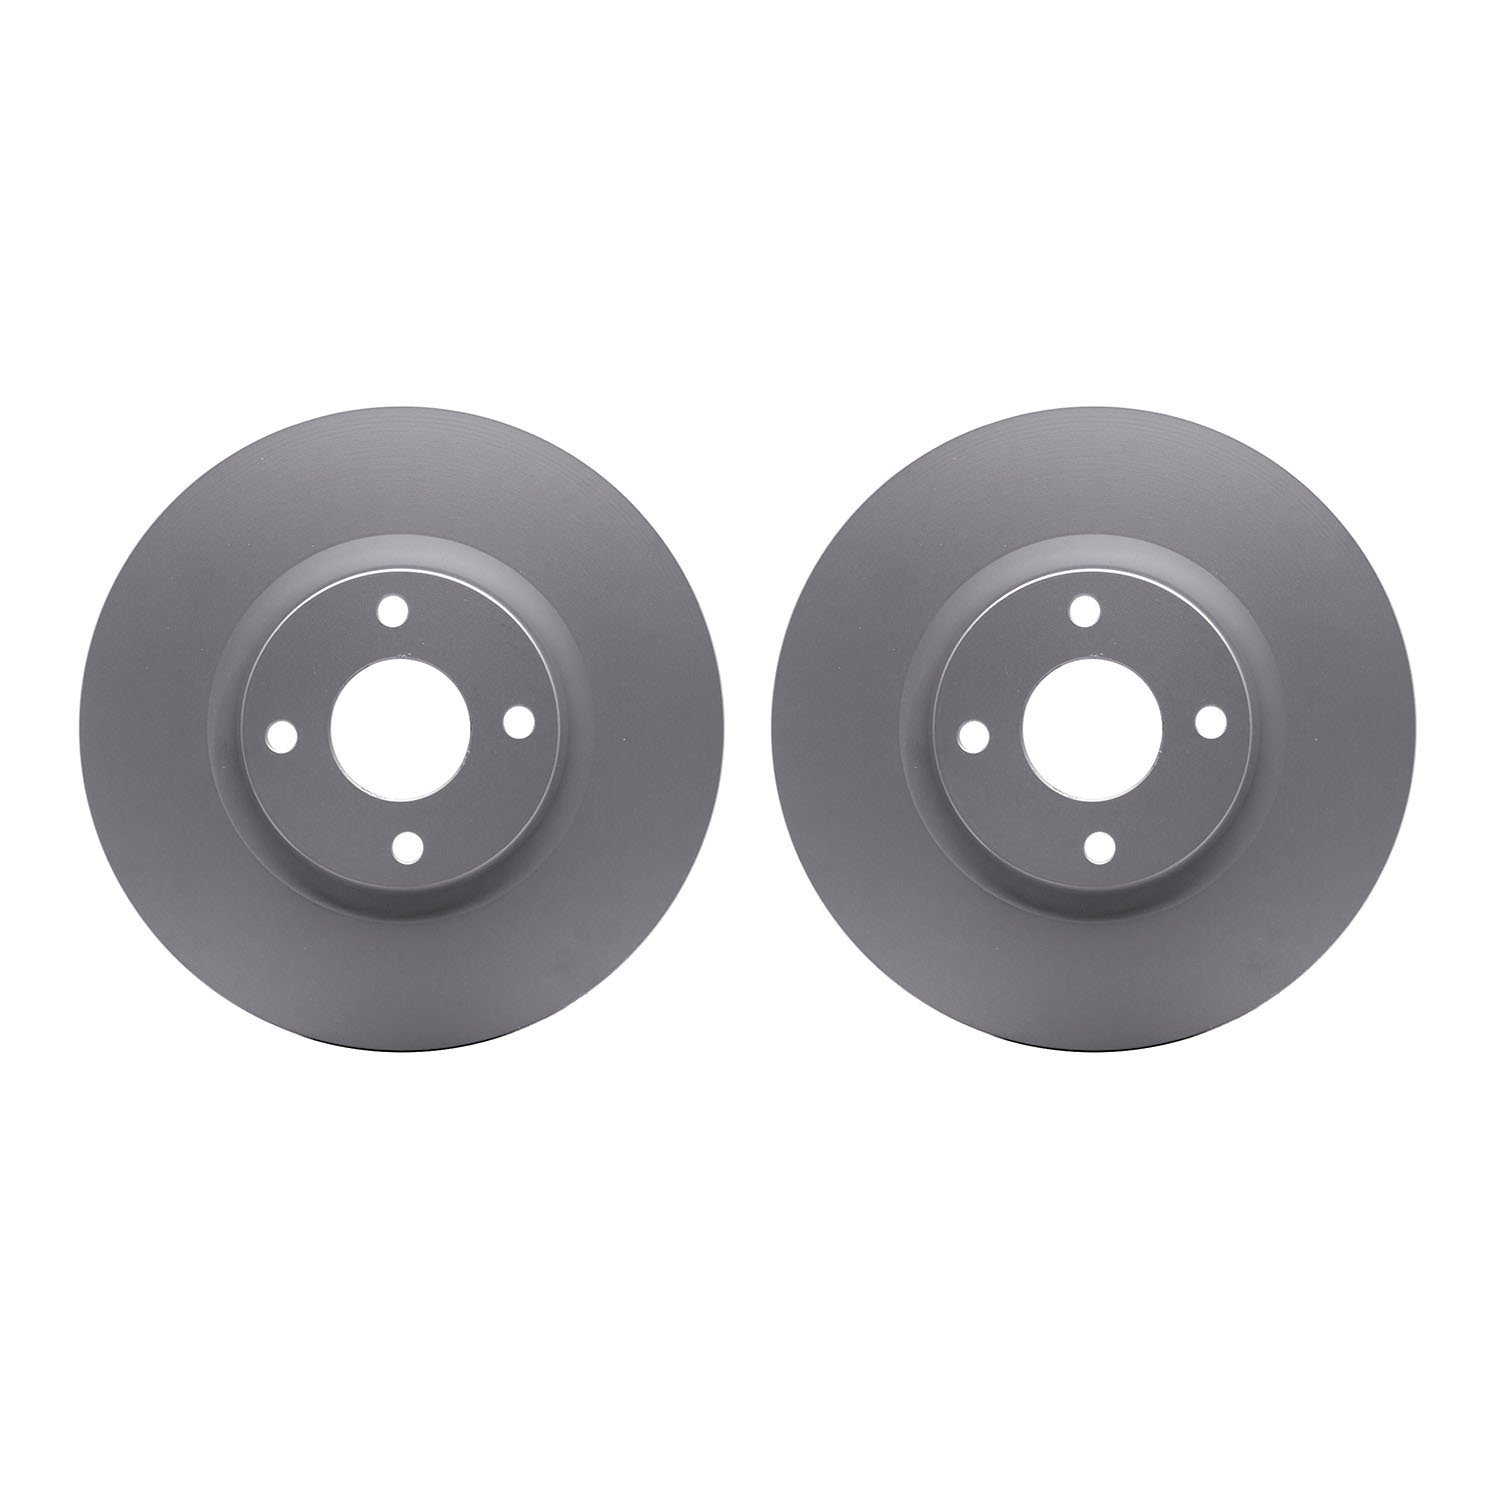 4002-54162 Geospec Brake Rotors, Fits Select Ford/Lincoln/Mercury/Mazda, Position: Front